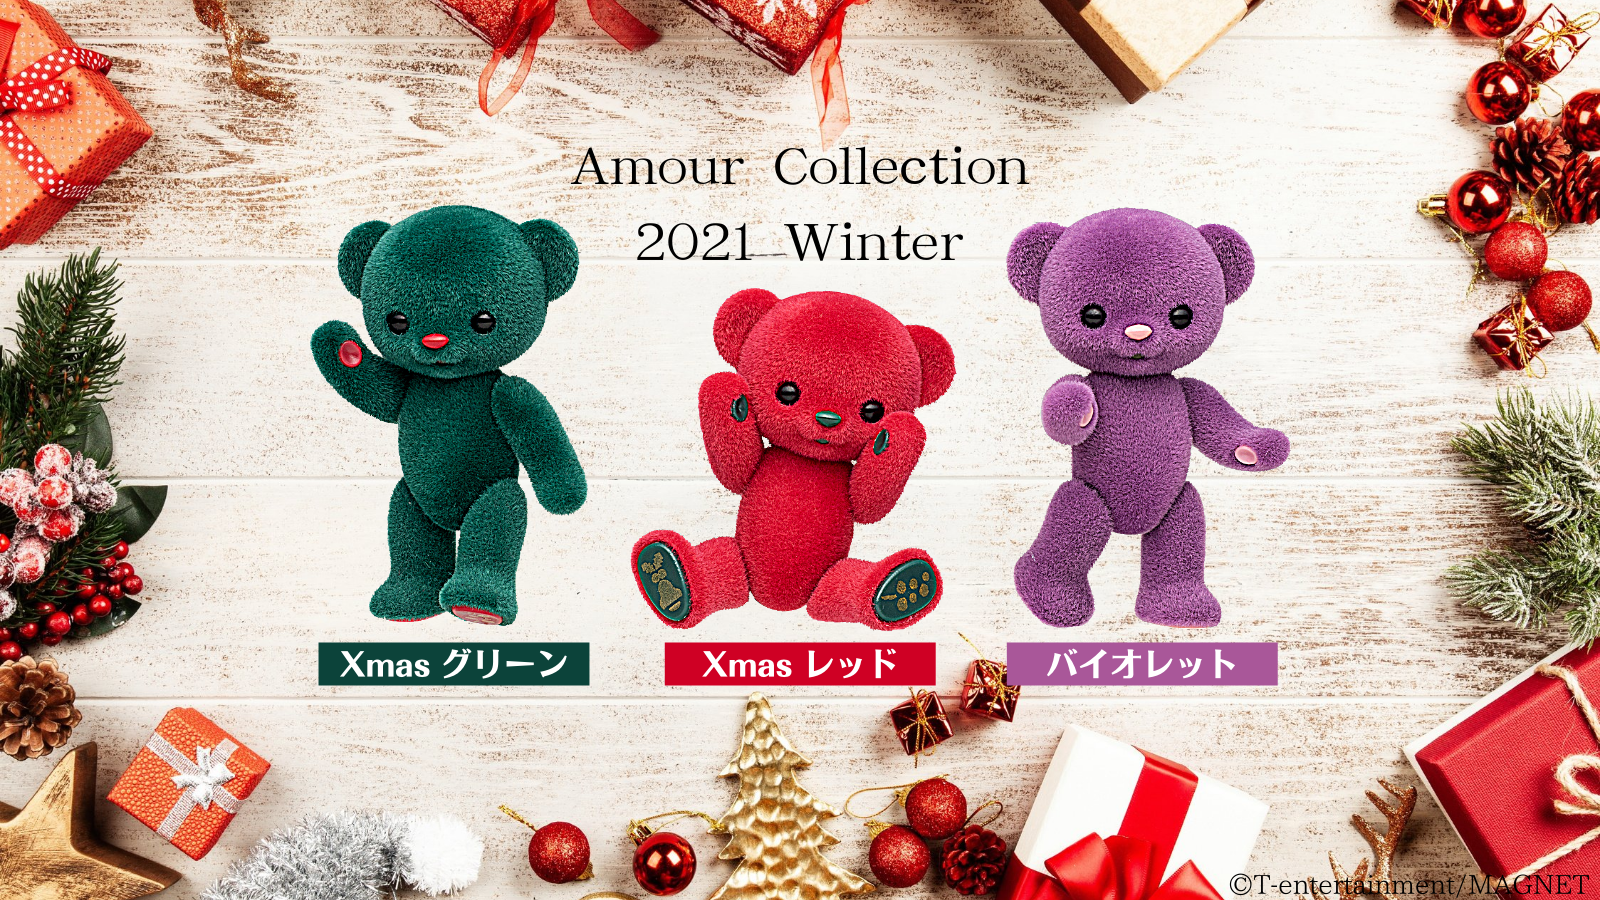 「Amour Collection 2021 Winter」の予約受付を開始いたしました